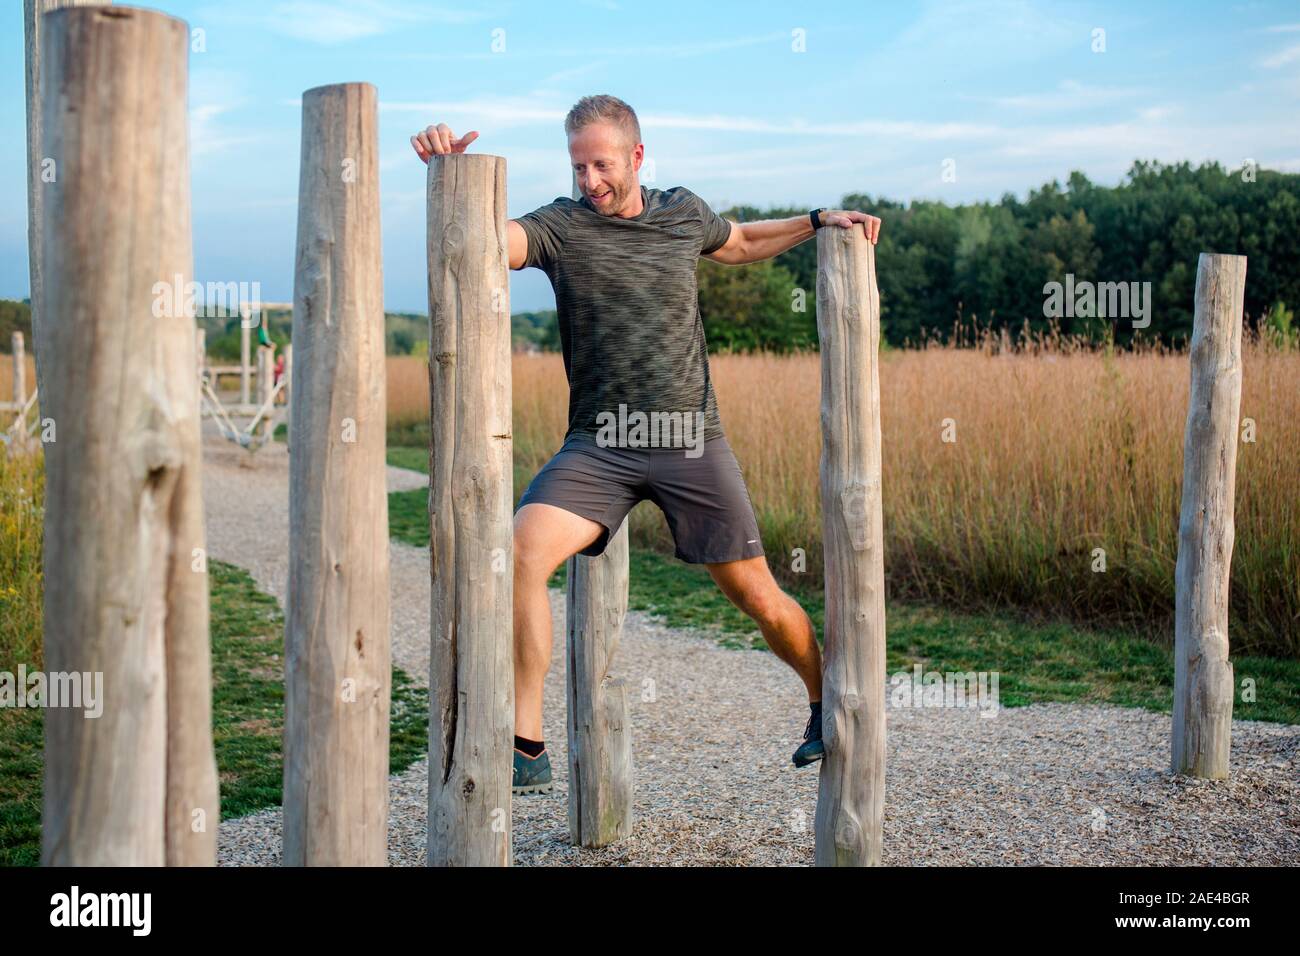 A happy man walks across a series of wooden poles on obstacle course Stock Photo